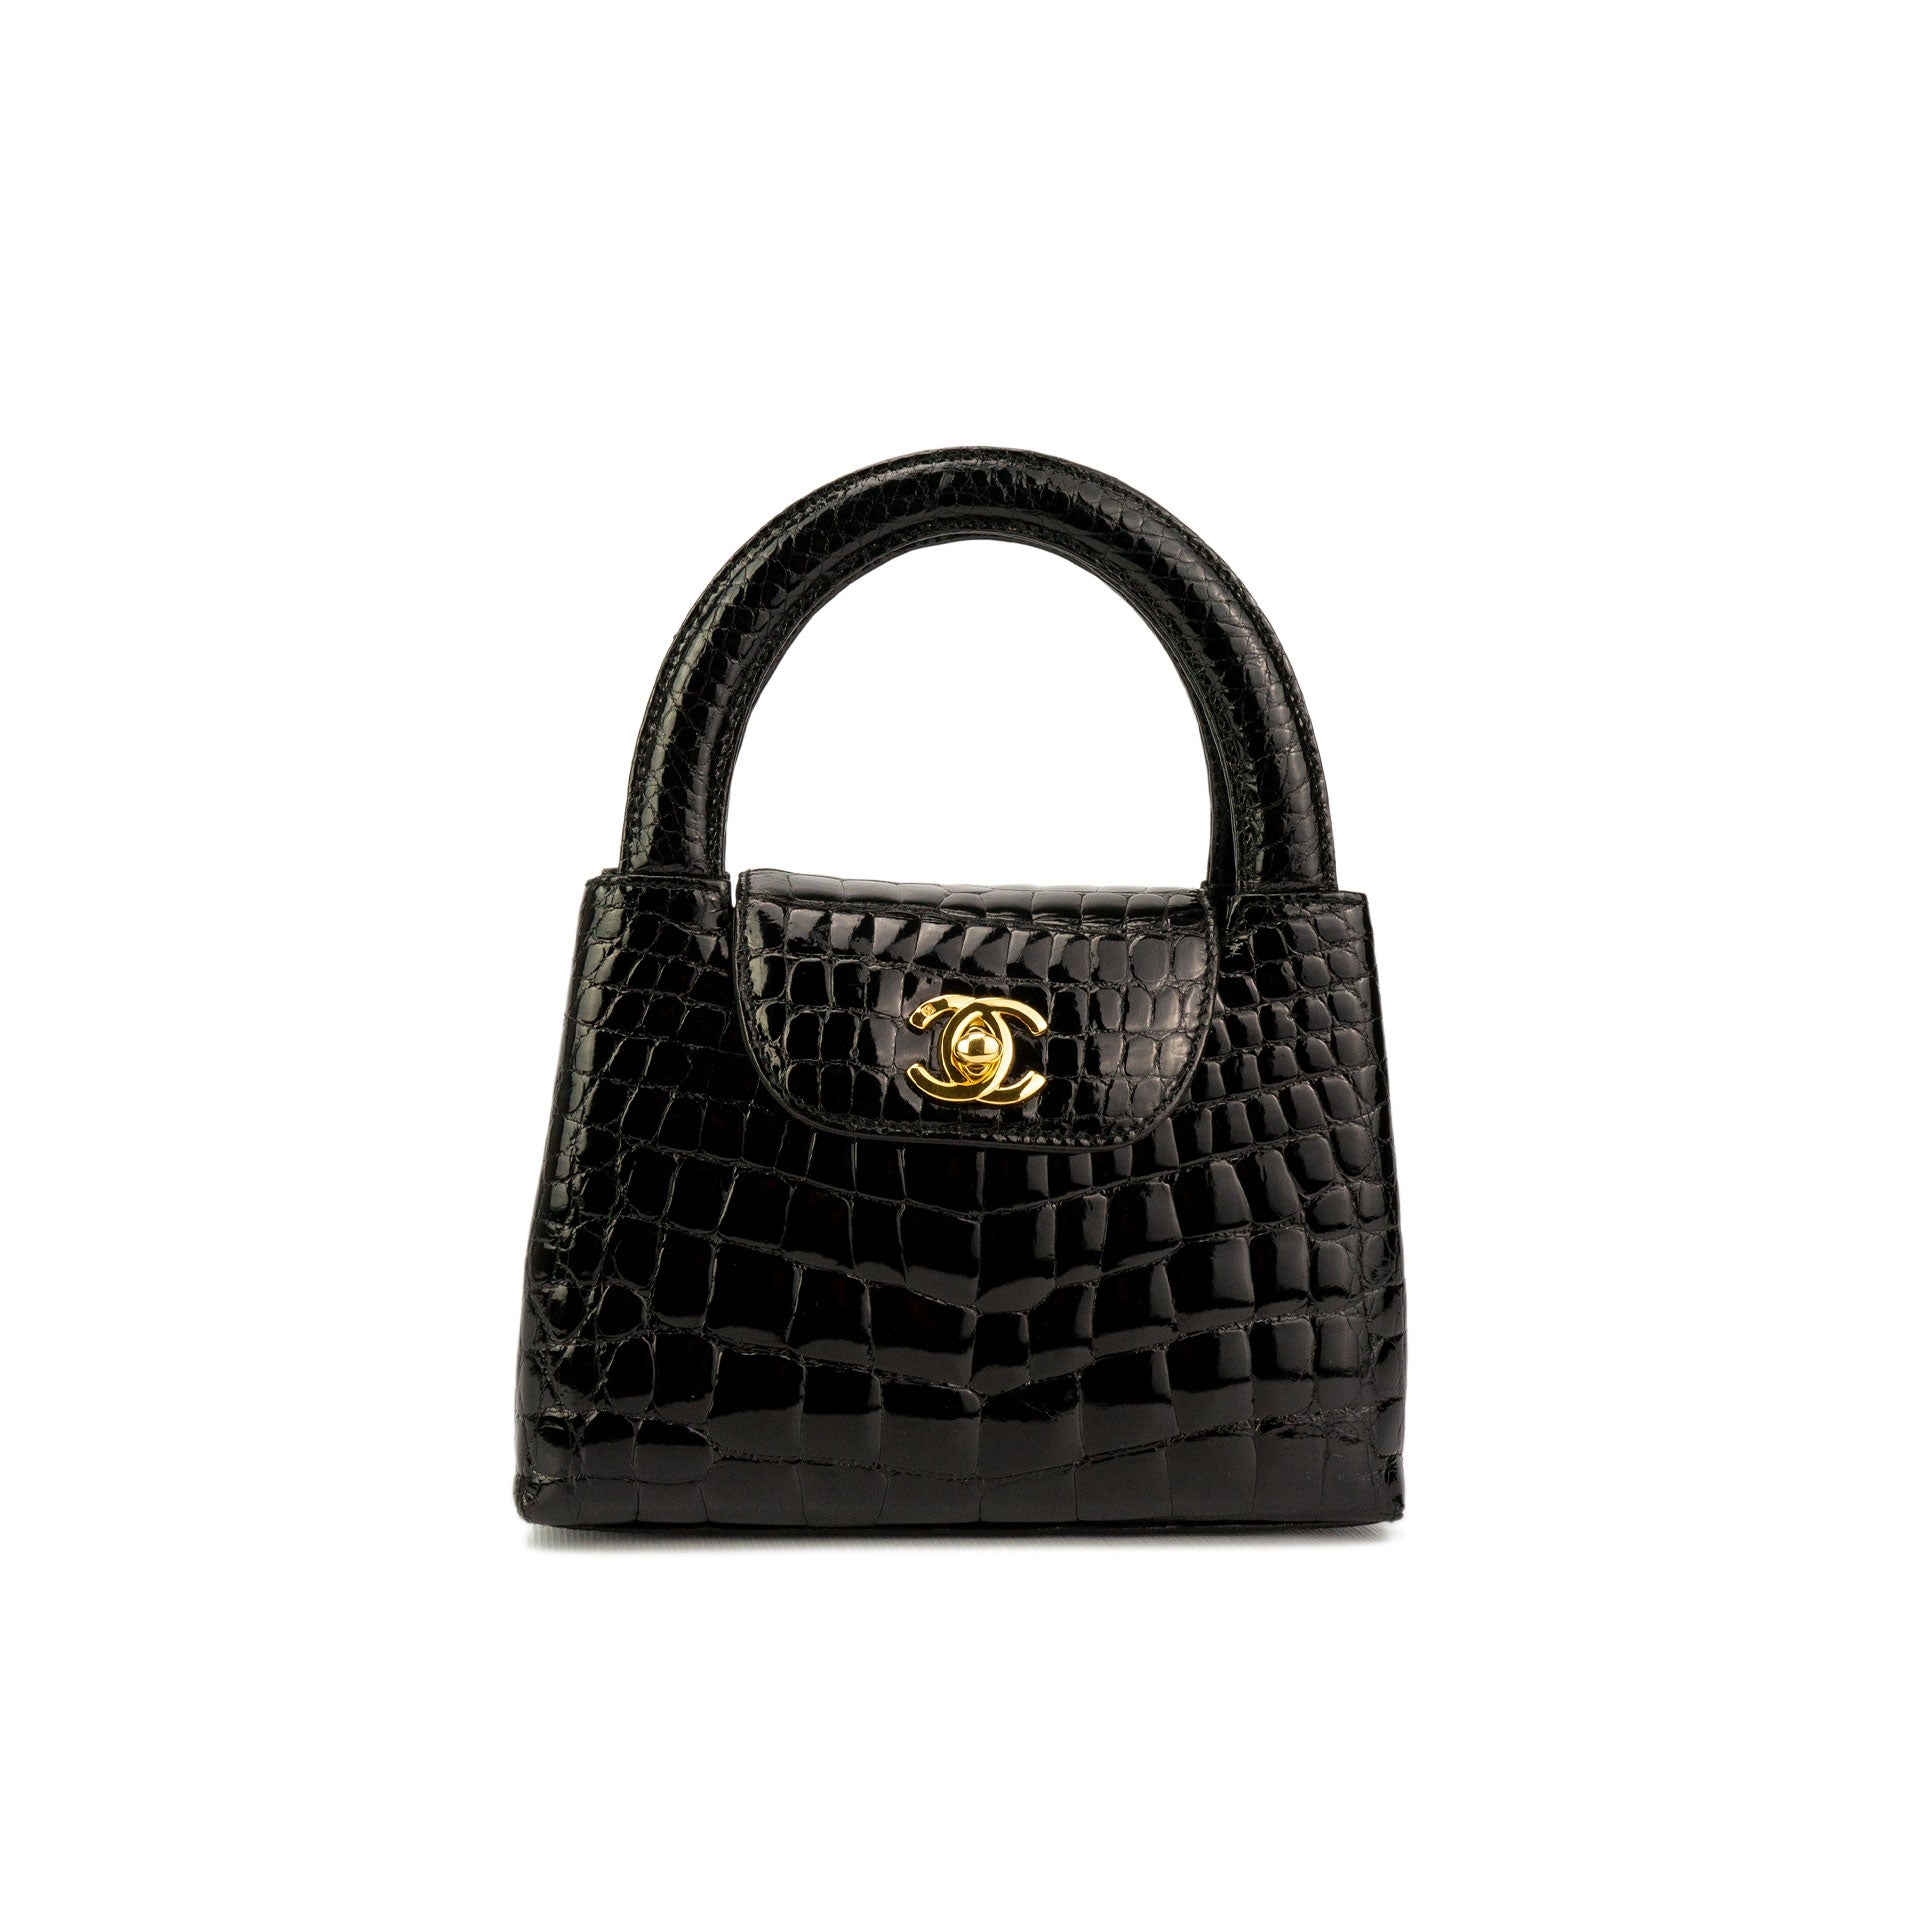 Chanel Black Shiny Alligator Mini Clutch with Light Gold Tone Hardware, Handbags and Accessories Online, 2019